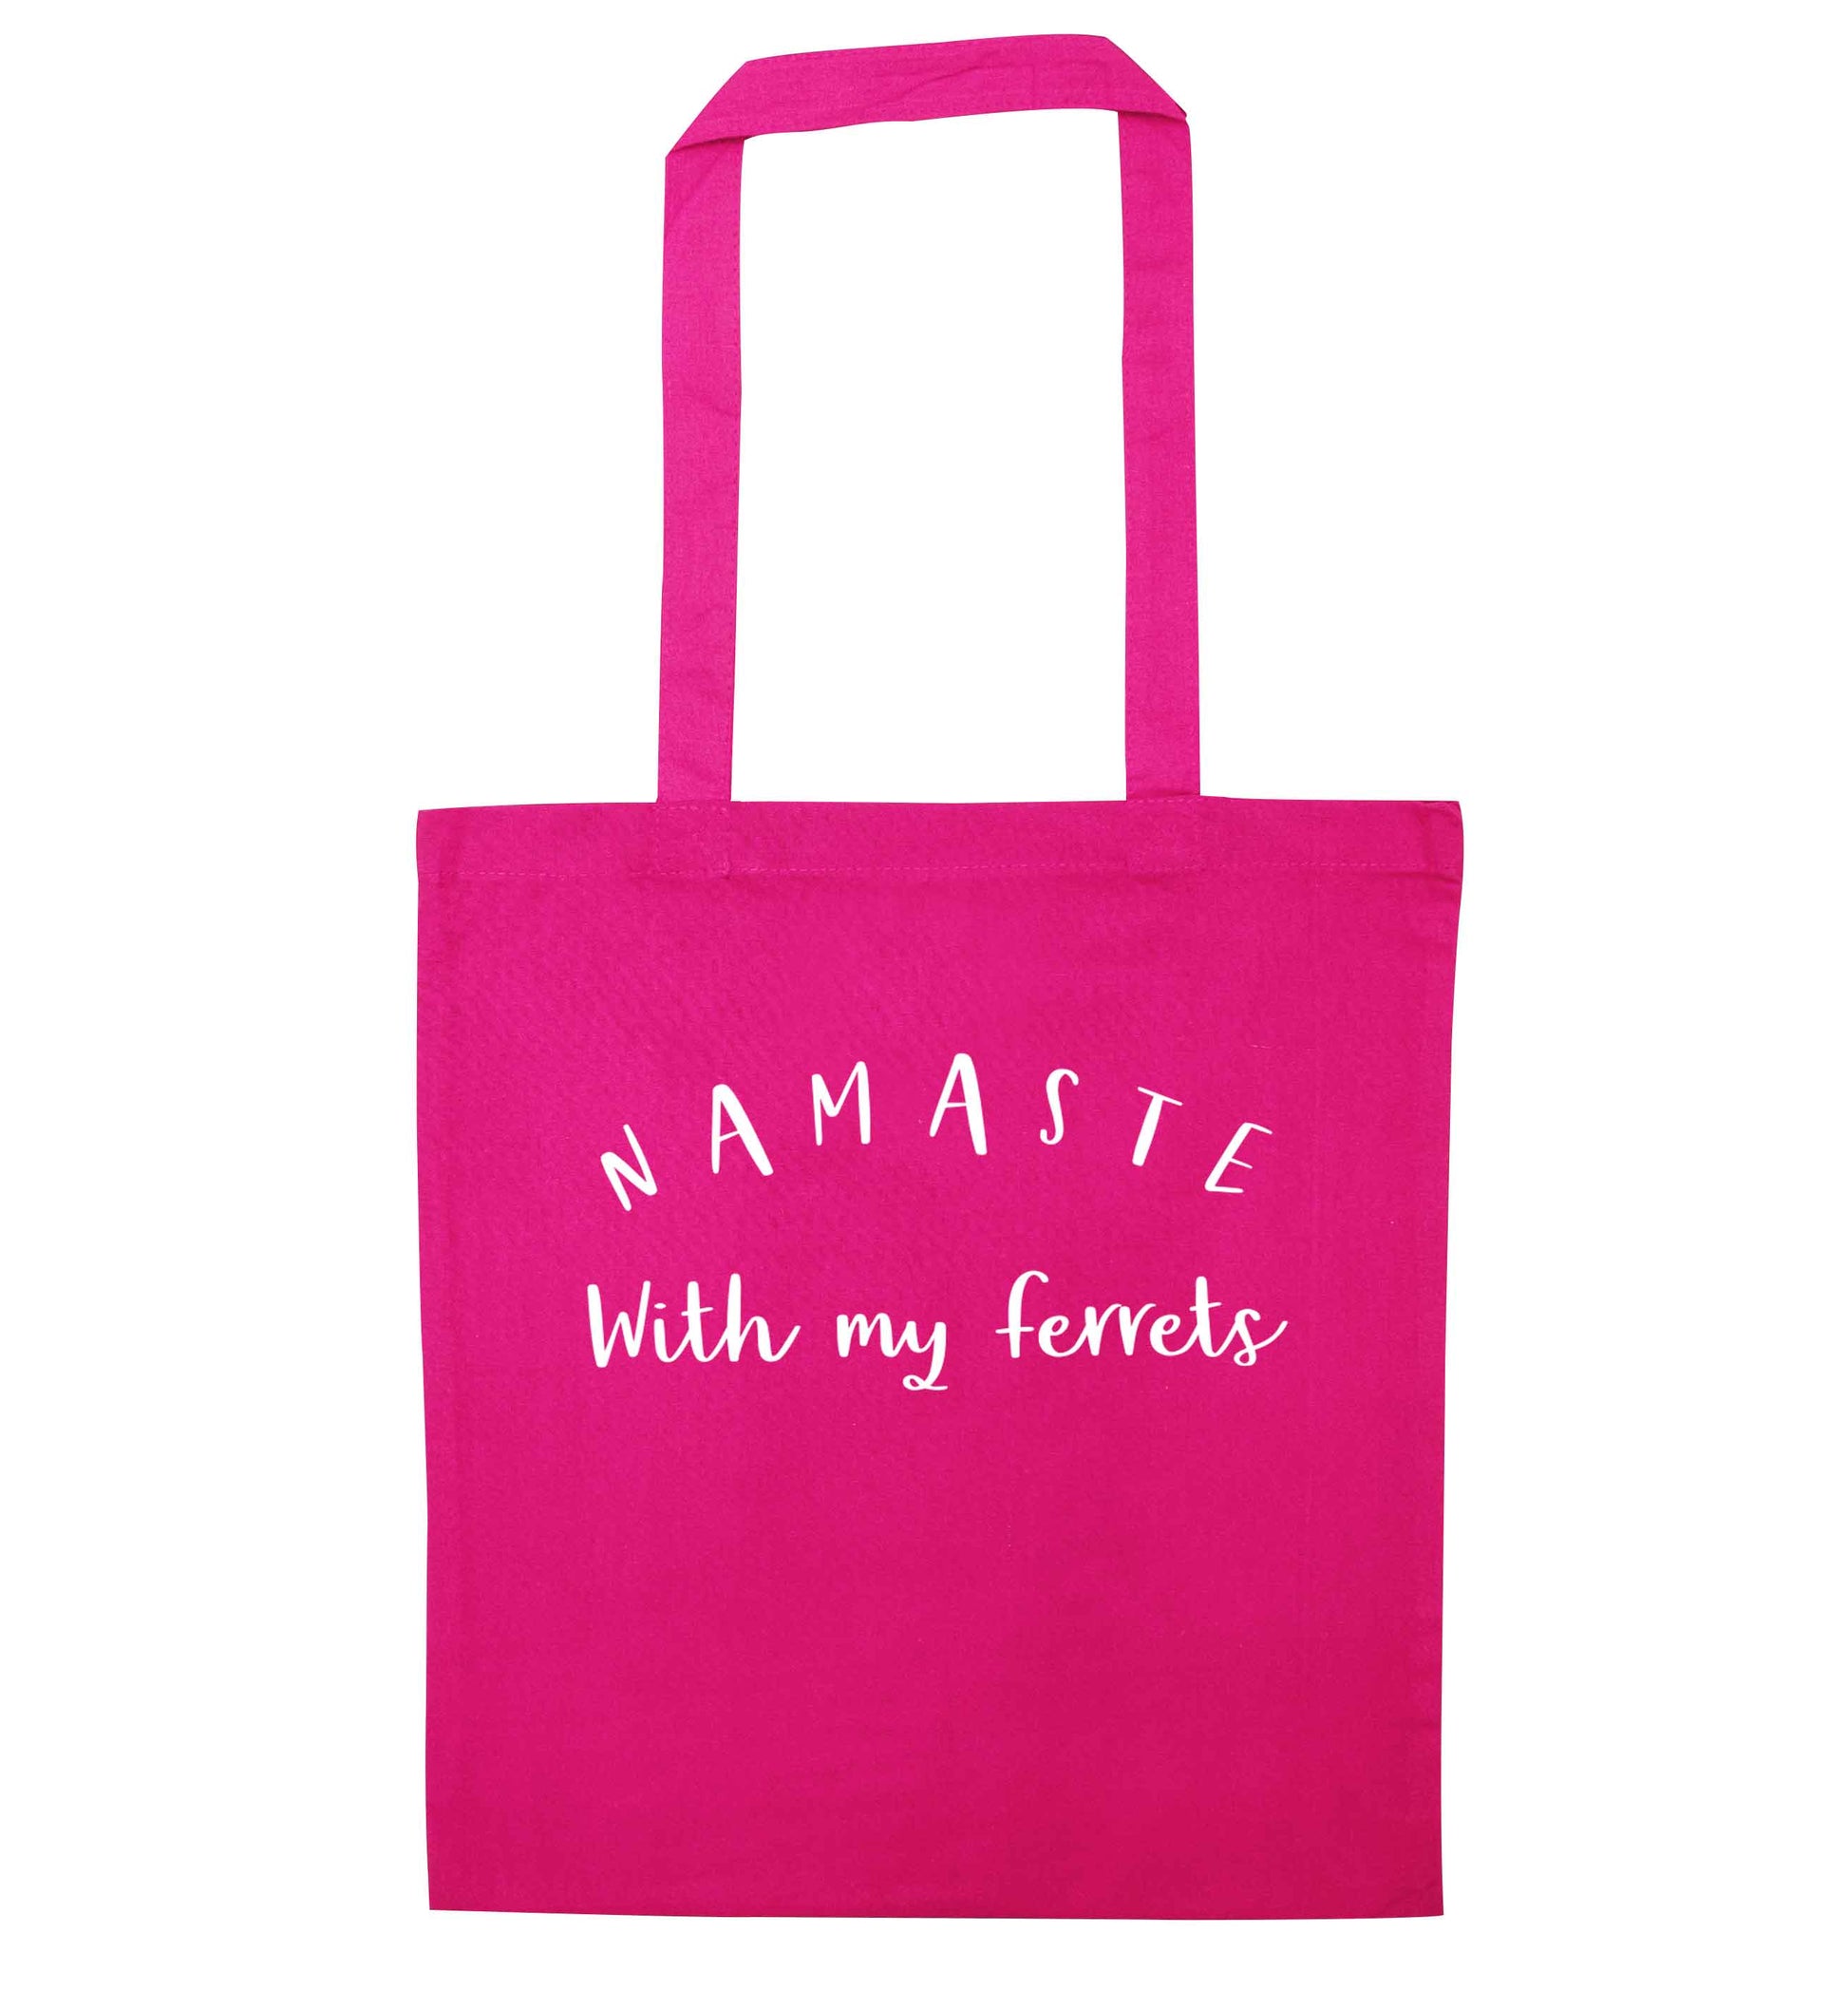 Namaste with my ferrets pink tote bag